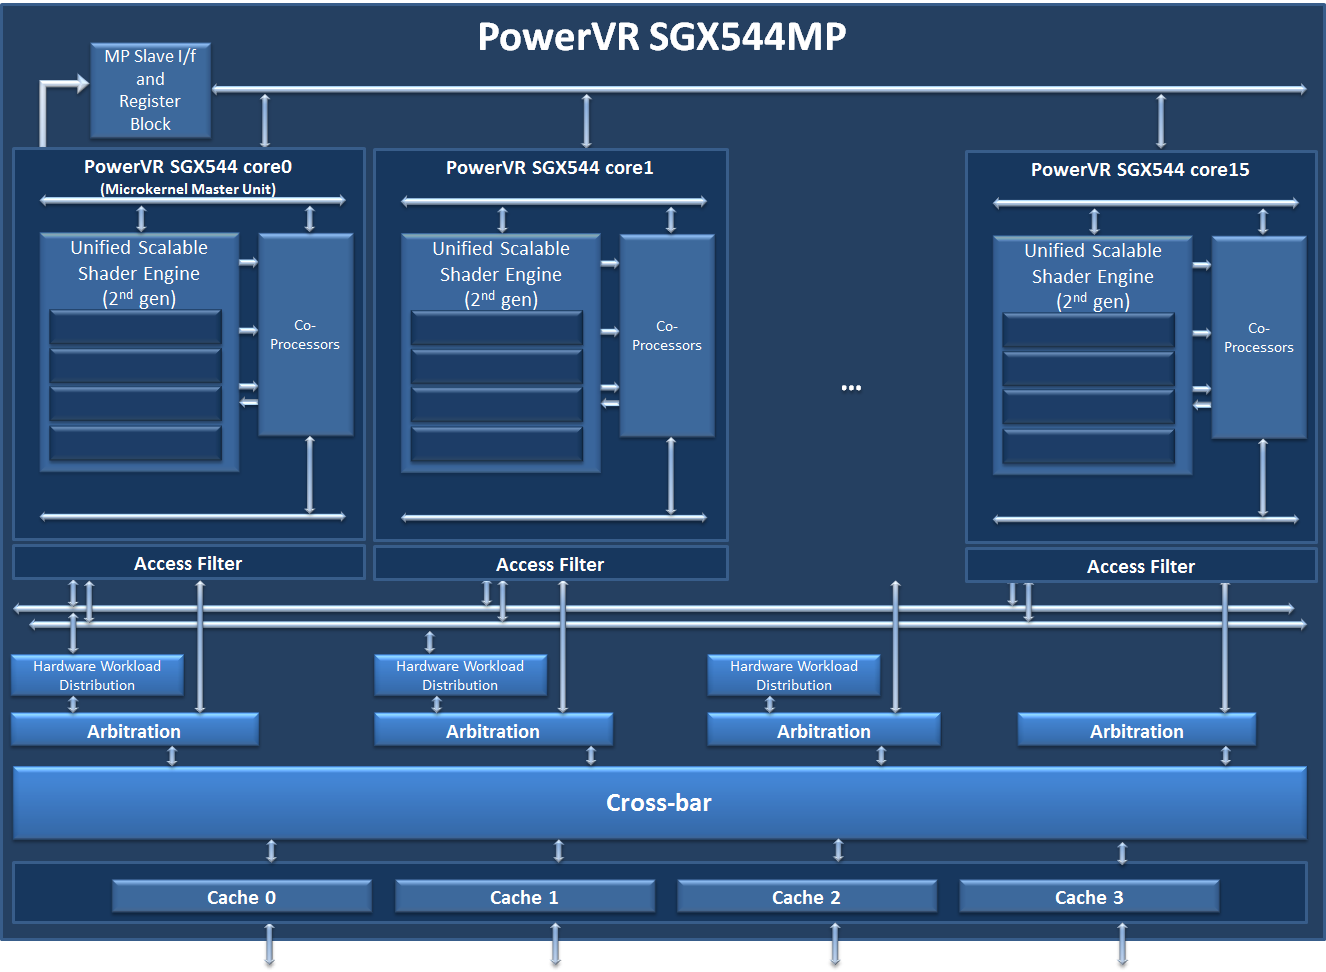 The PowerVR SGX544MP - Samsung Galaxy S 4 shares PowerVR GPU with the Apple iPhone 5